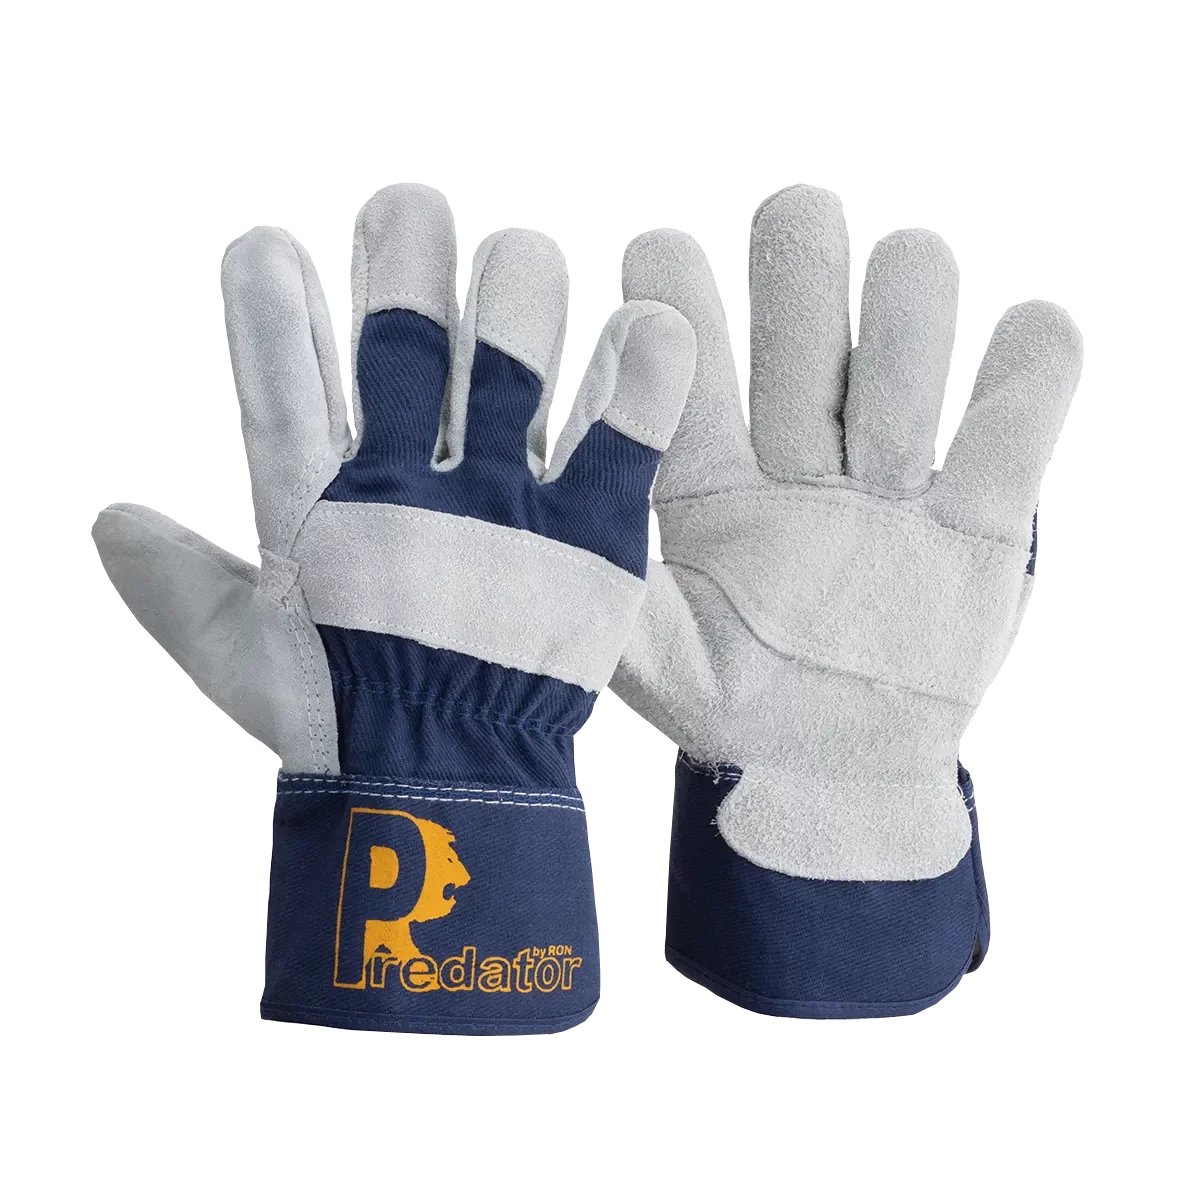 RS1D Pair Safety Gloves